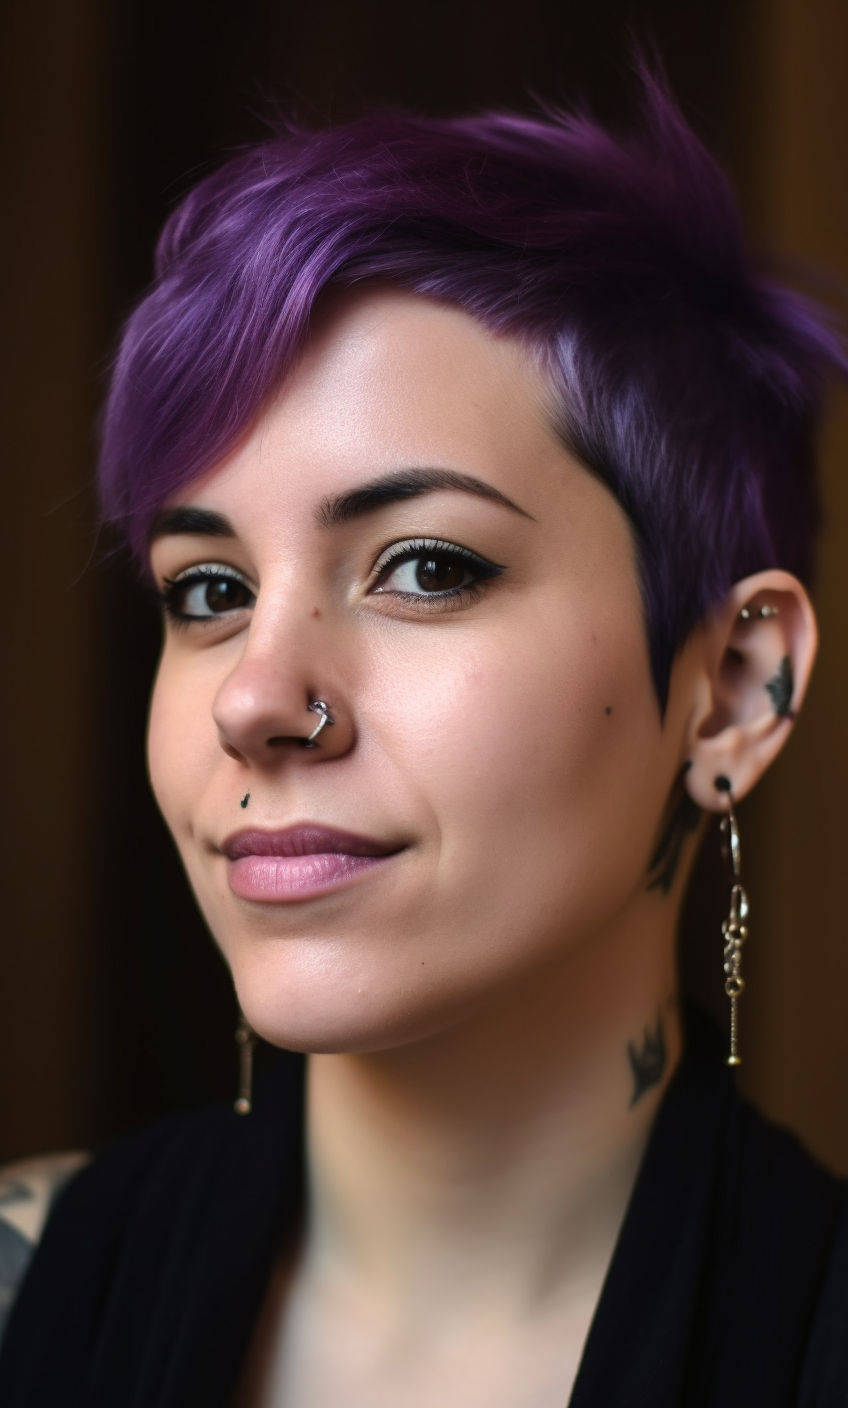 Jen_Palmer_a_woman_with_a_purple_pixie_is_posing_with_earrings__83c6fb08-d06d-47d7-87ff-93c385dda481.png